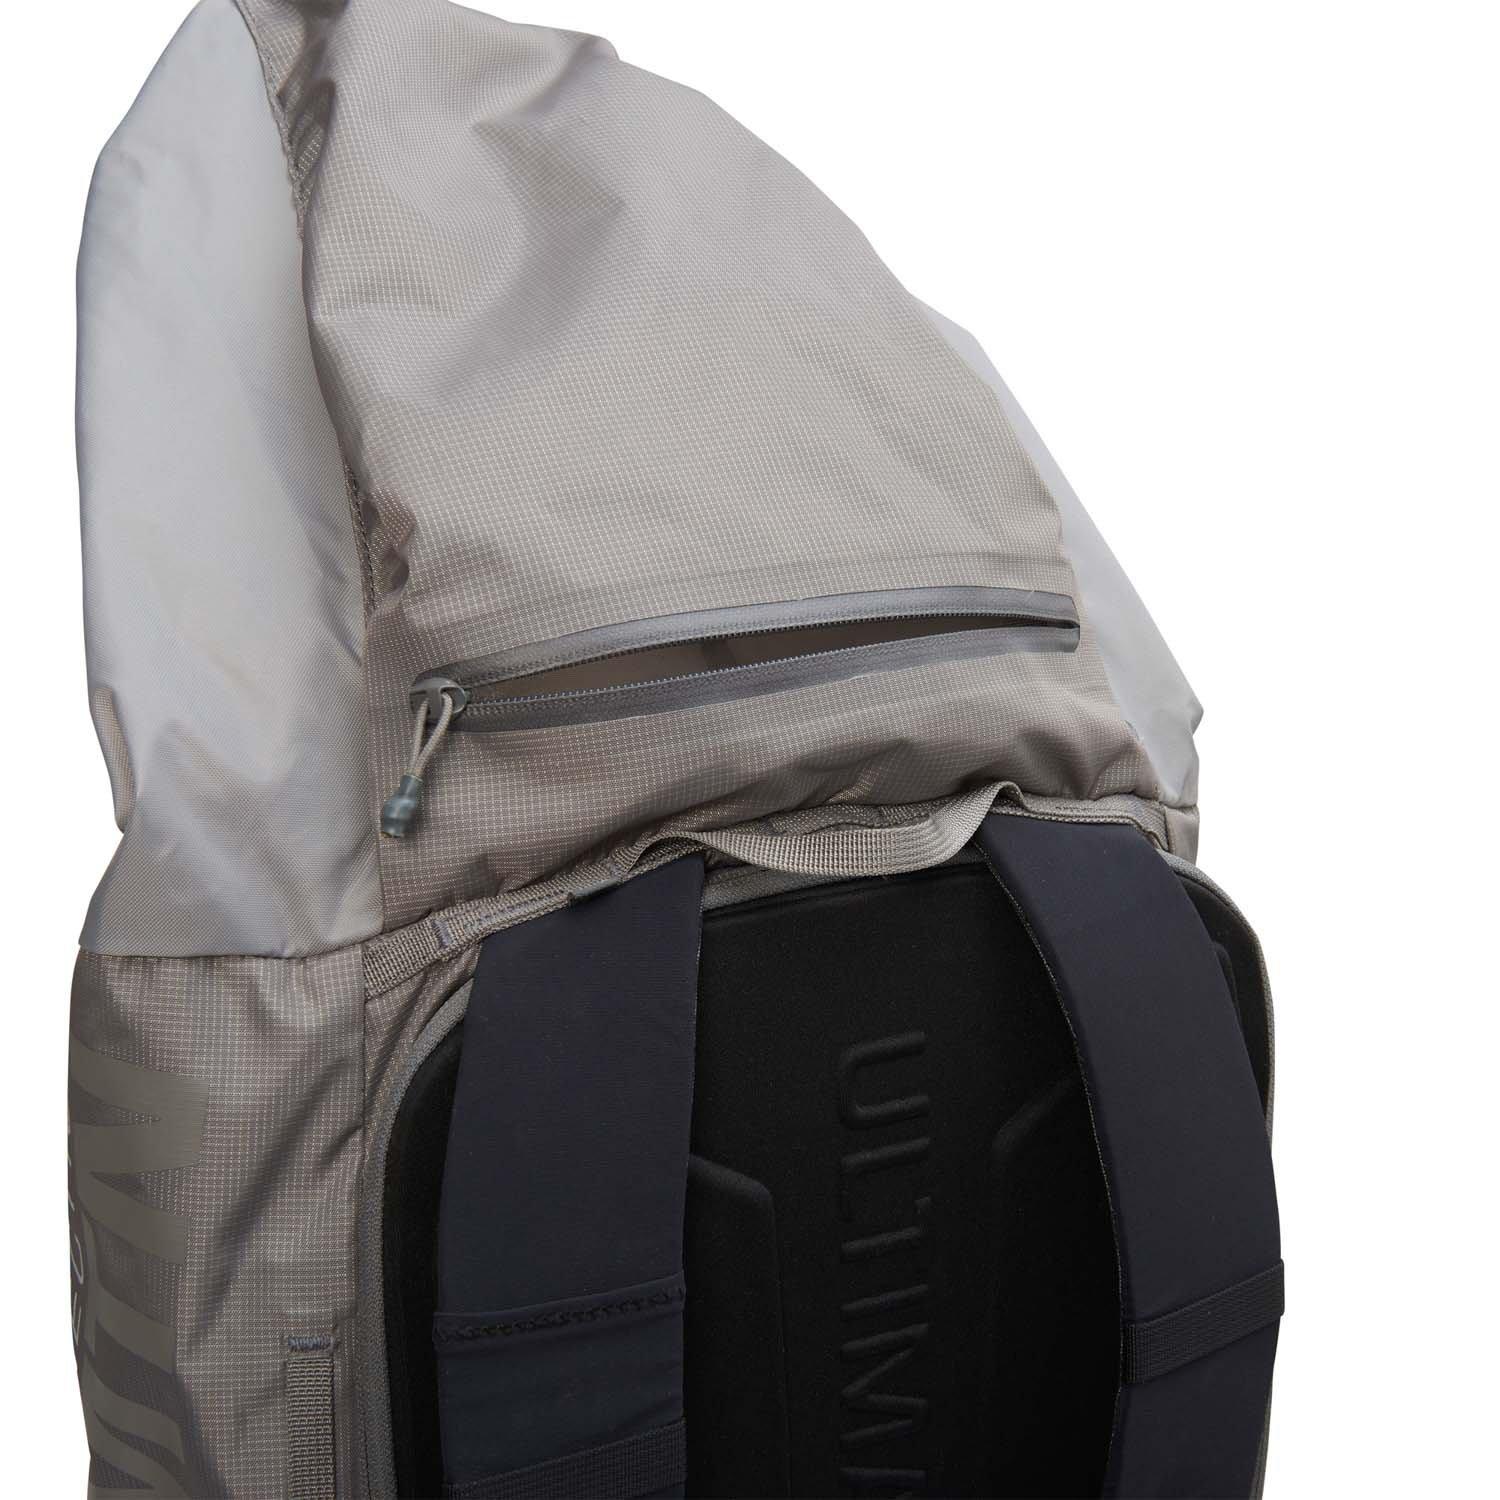 Ultimate Direction All Mountain Pack -  Graphite